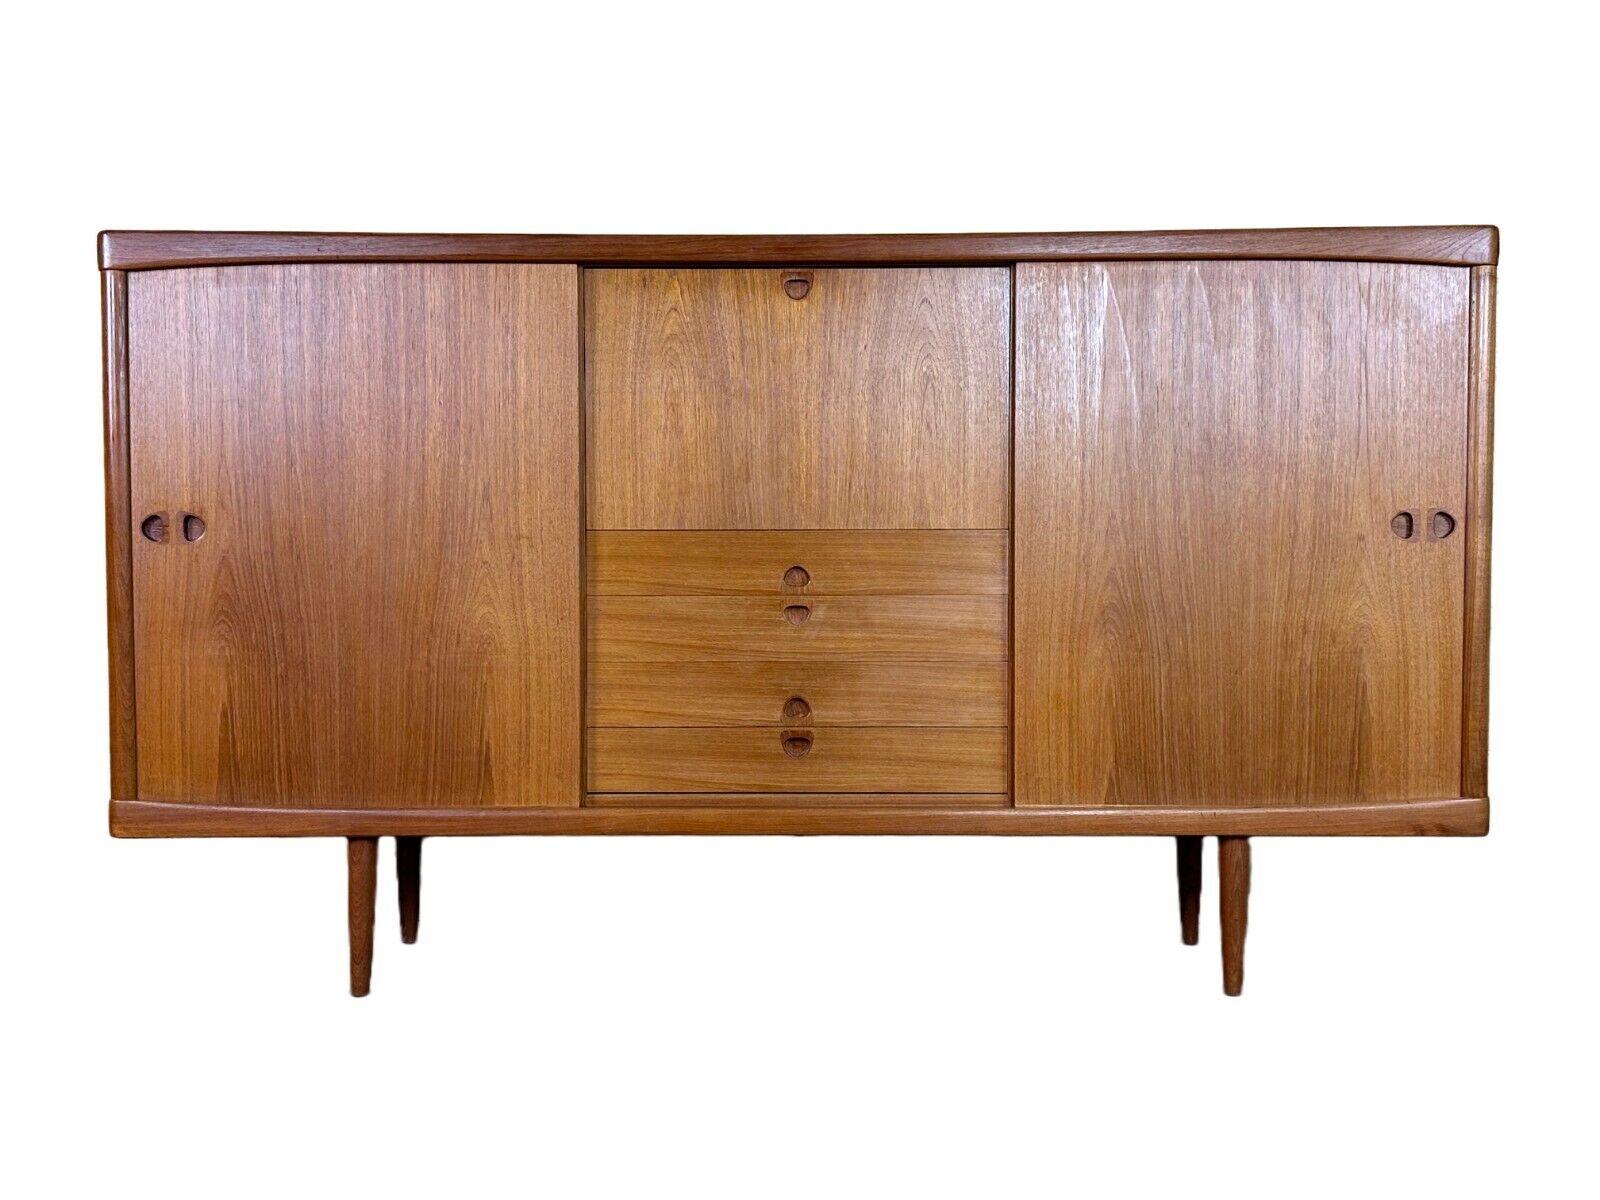 60s 70s teak sideboard highboard H.W. Klein Bramin Danish Modern Design

Object: sideboard

Manufacturer: Bramin

Condition: good

Age: around 1960-1970

Dimensions:

Width = 225cm
Depth = 44.5cm
Height = 125cm

Other notes:

The pictures serve as